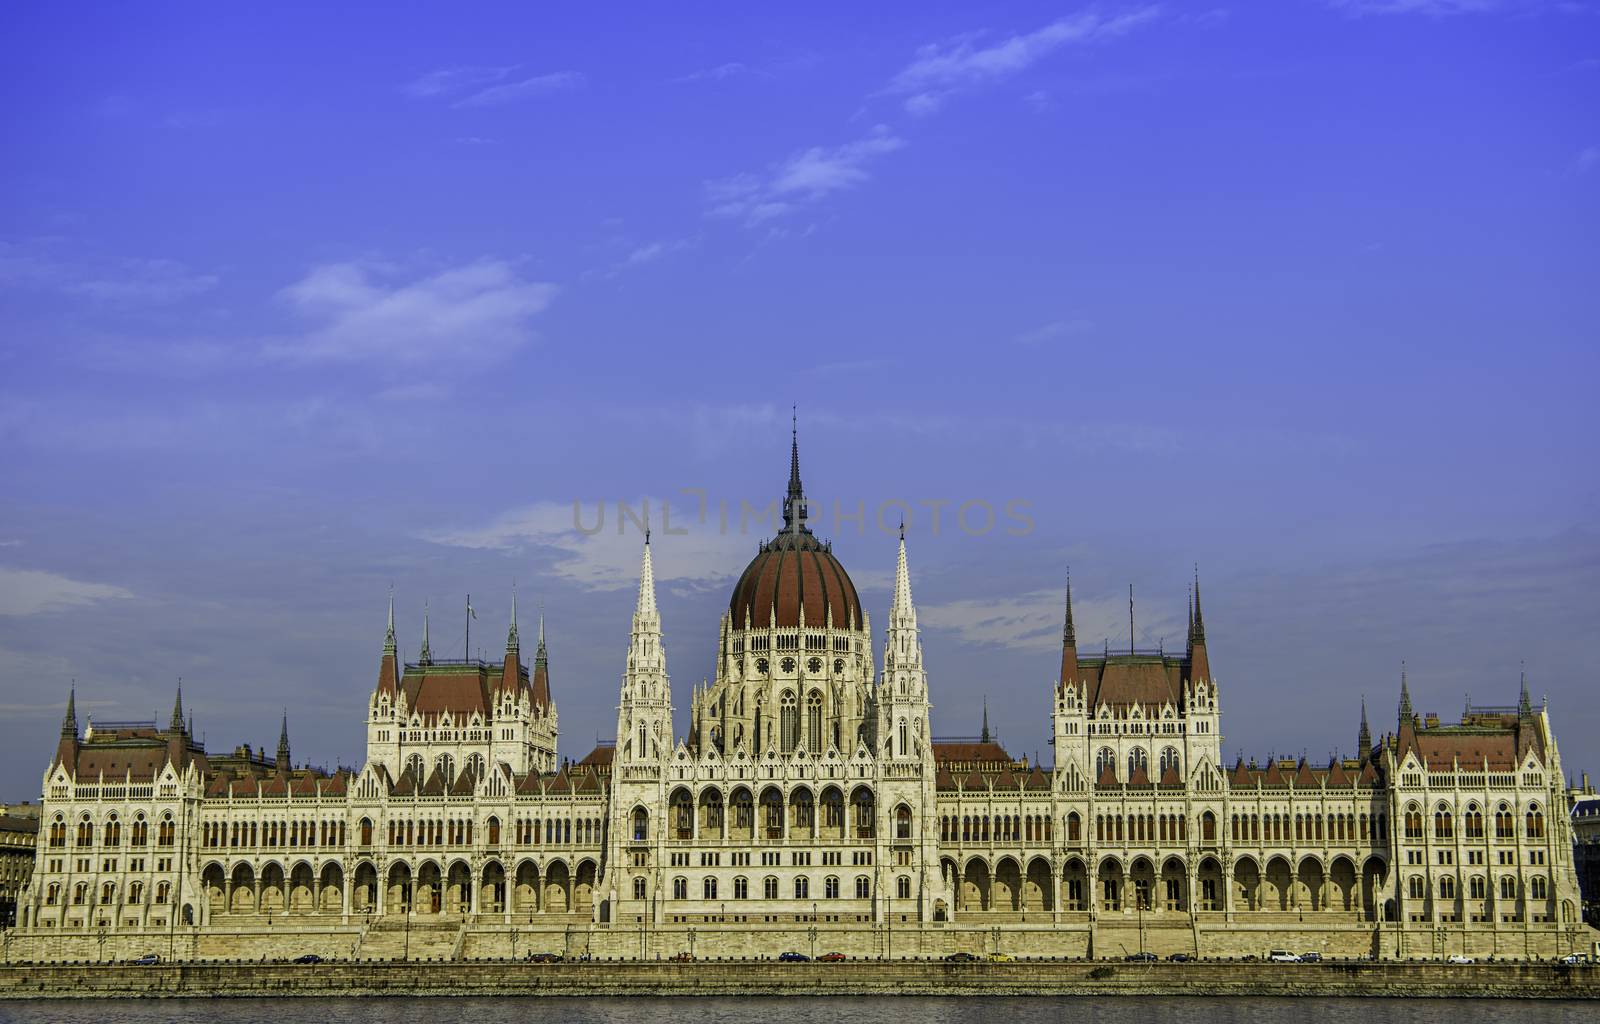 Front view of the Hungarian Parliament building from the Danube side during the day.